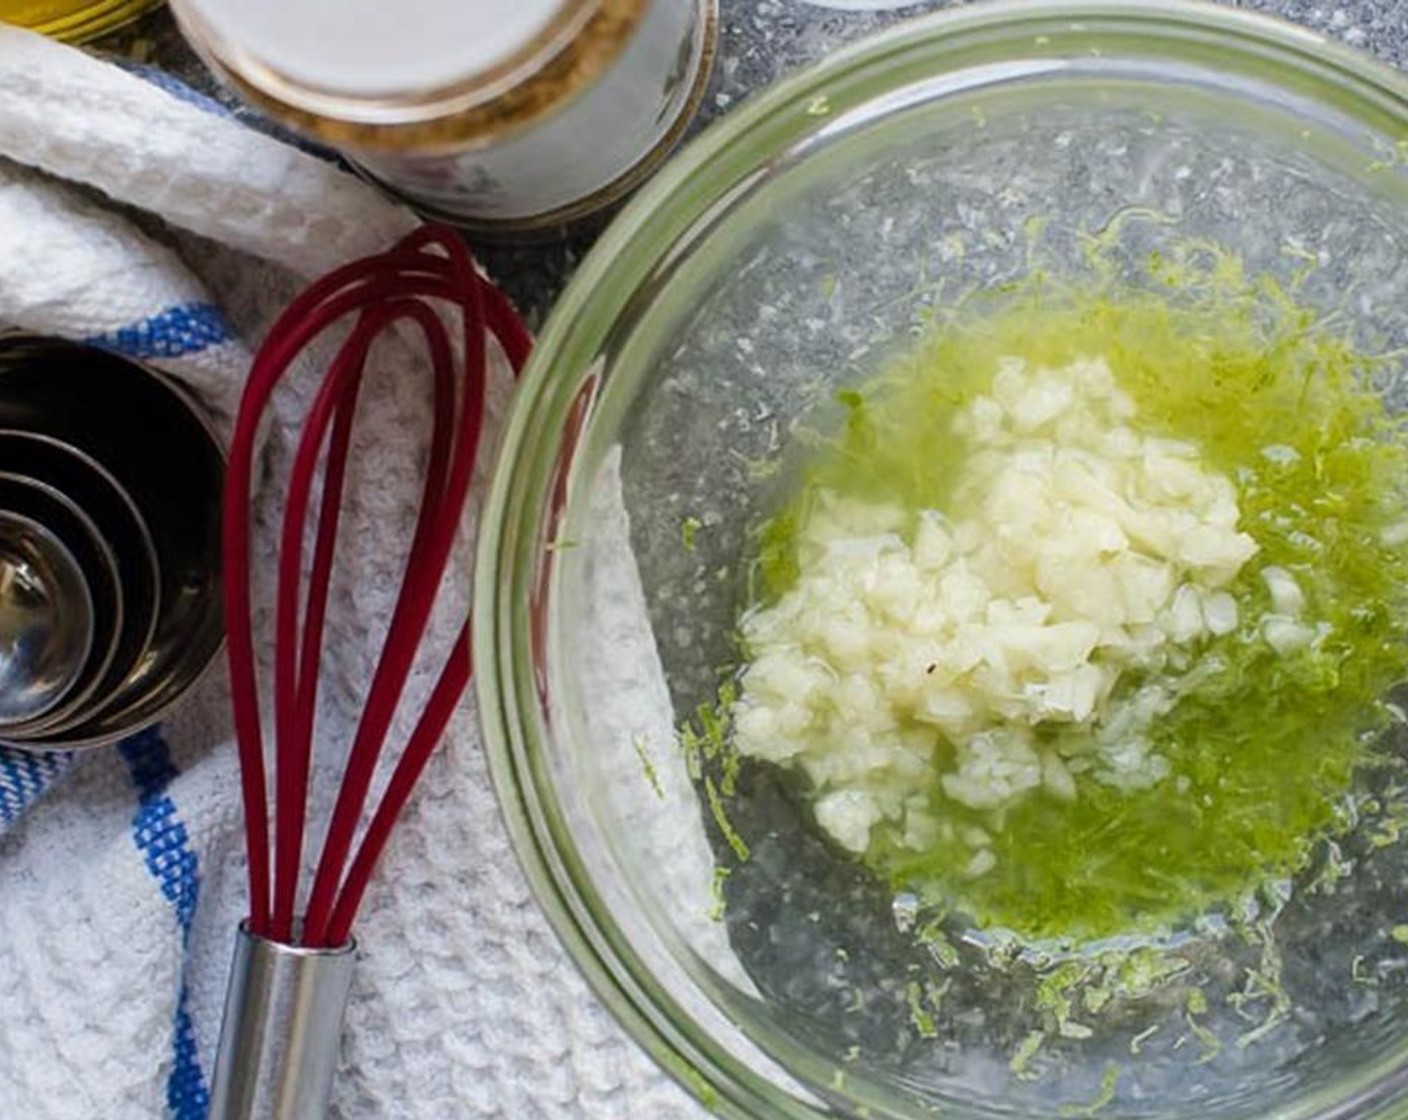 step 2 In a small bowl, combine Garlic (1 clove), zest and 2 Tbsp juice of the Lime (1), Dijon Mustard (1 tsp), Ground Cumin (1/2 Tbsp), Olive Oil (3 Tbsp), Kosher Salt (1/2 tsp)and Ground Black Pepper (1/2 tsp). Whisk until emulsified (combined).